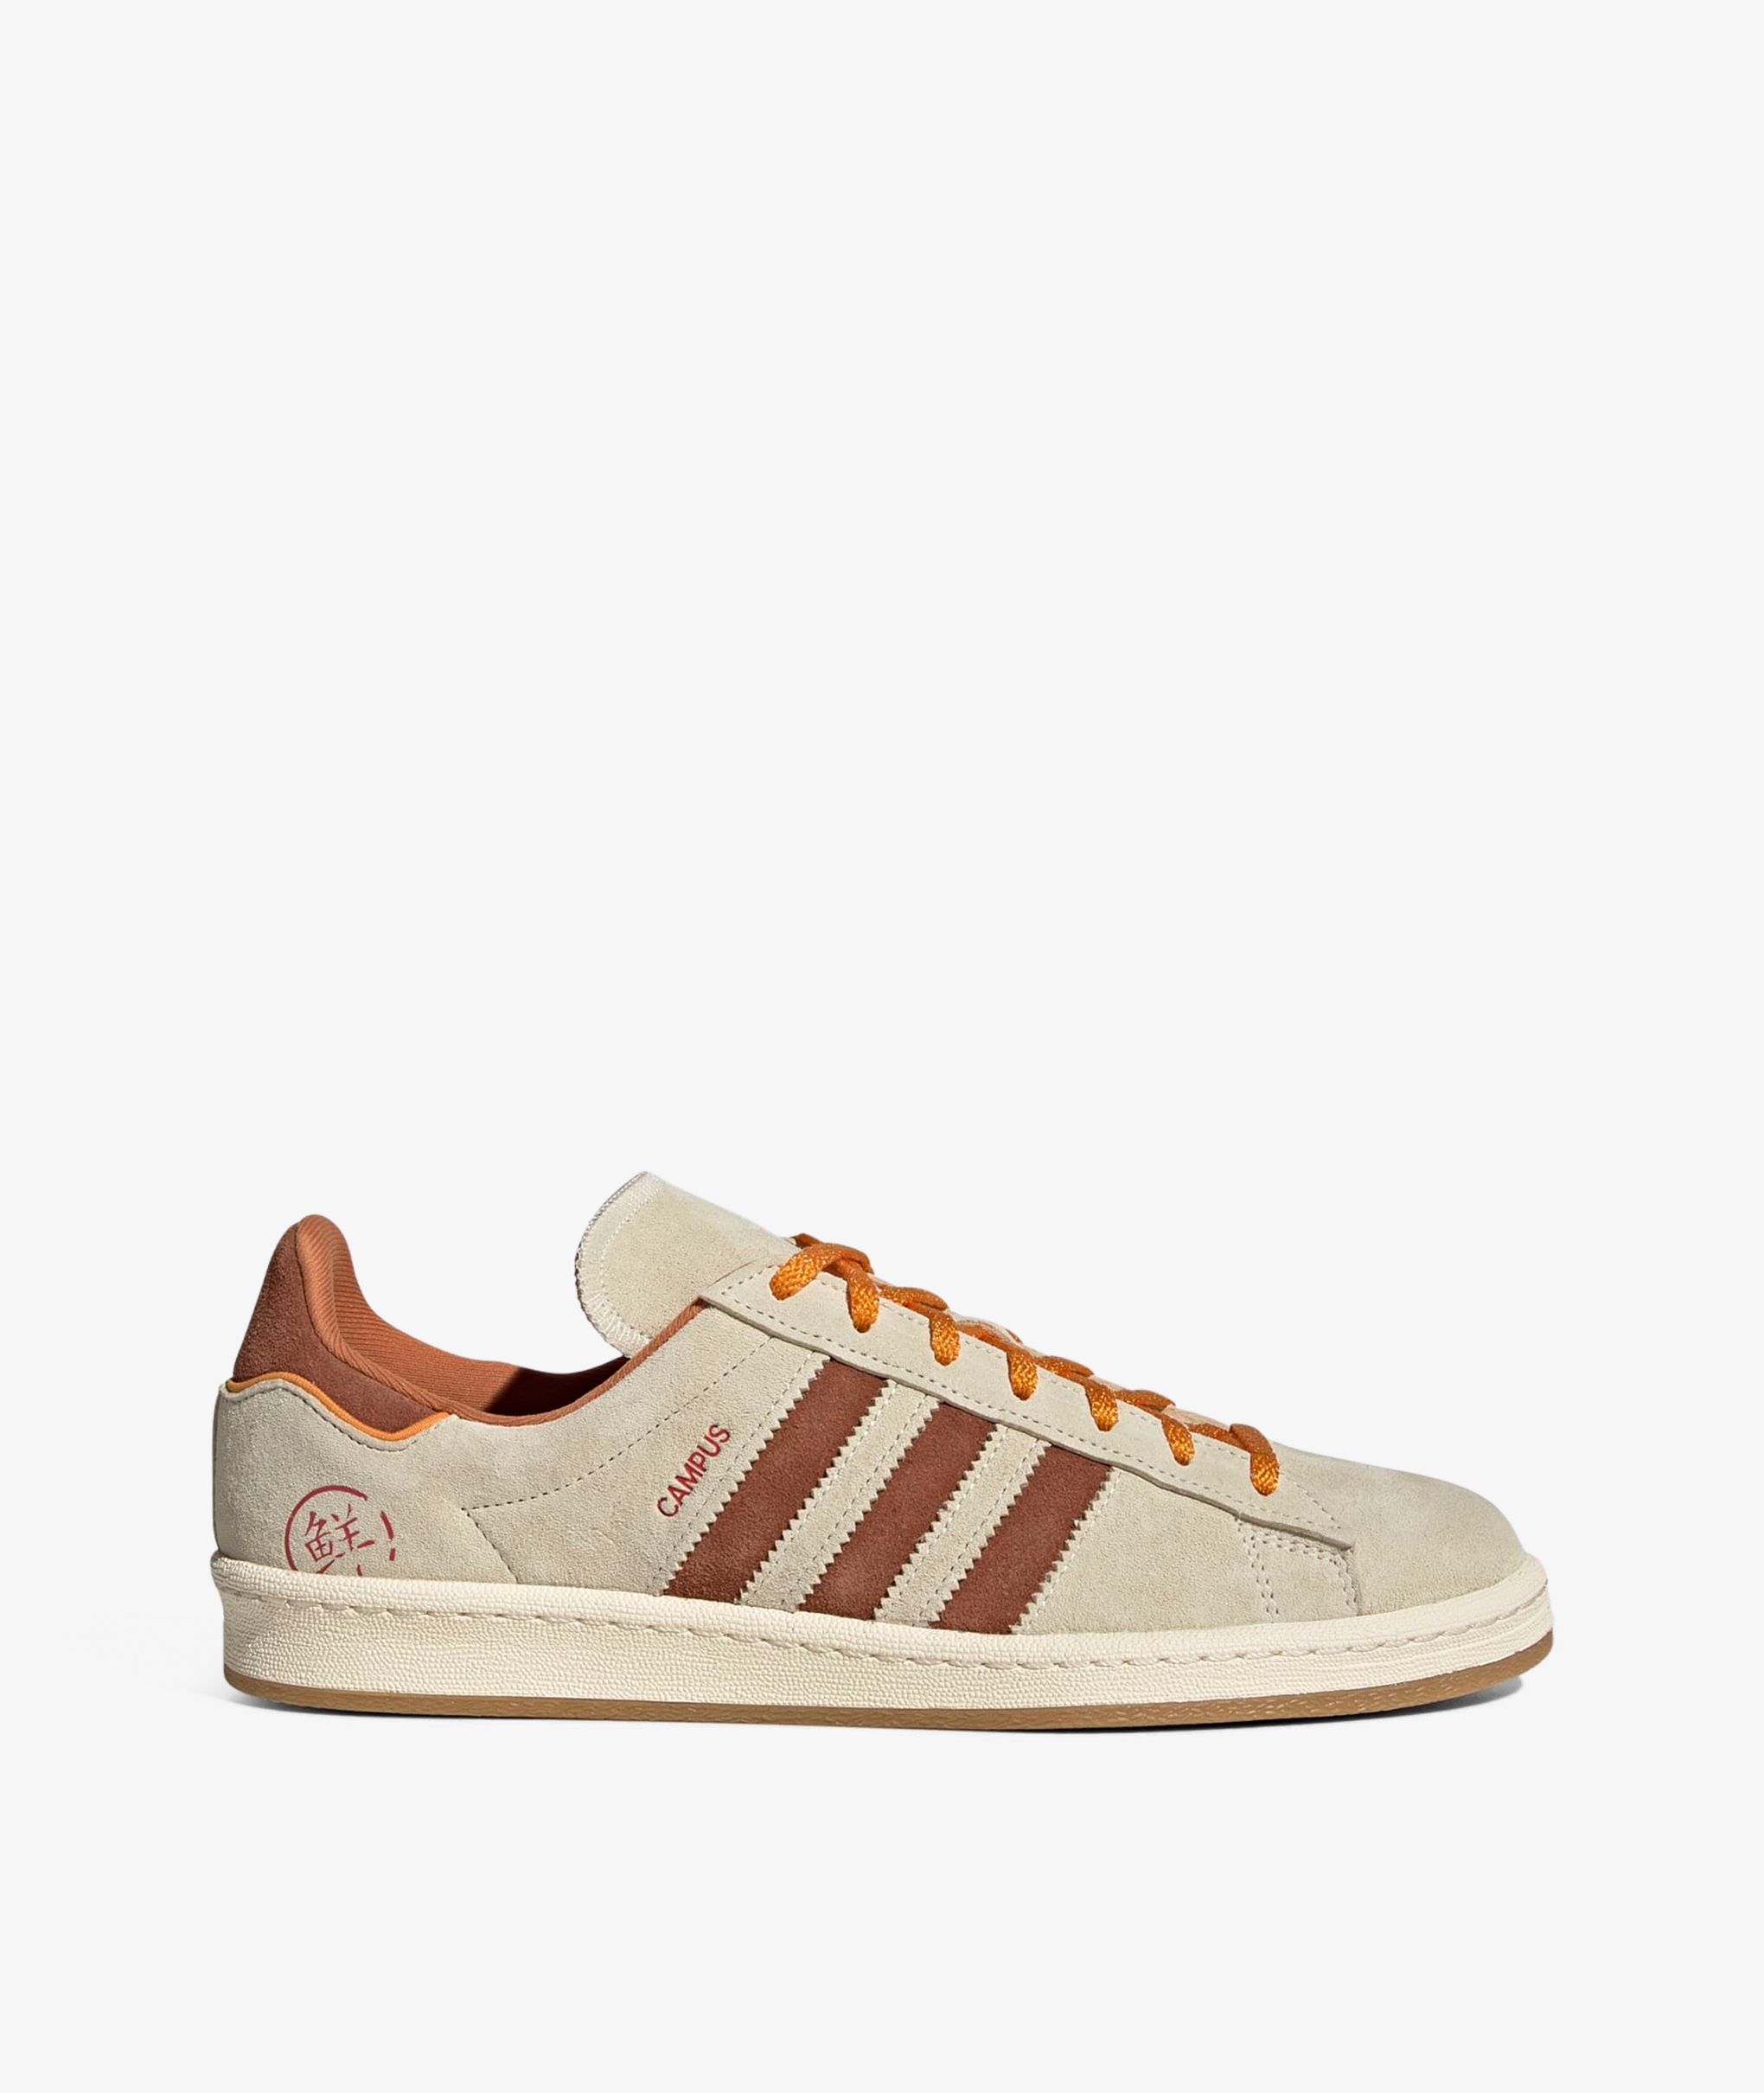 Norse Store | Shipping Worldwide - adidas Originals Campus 80s